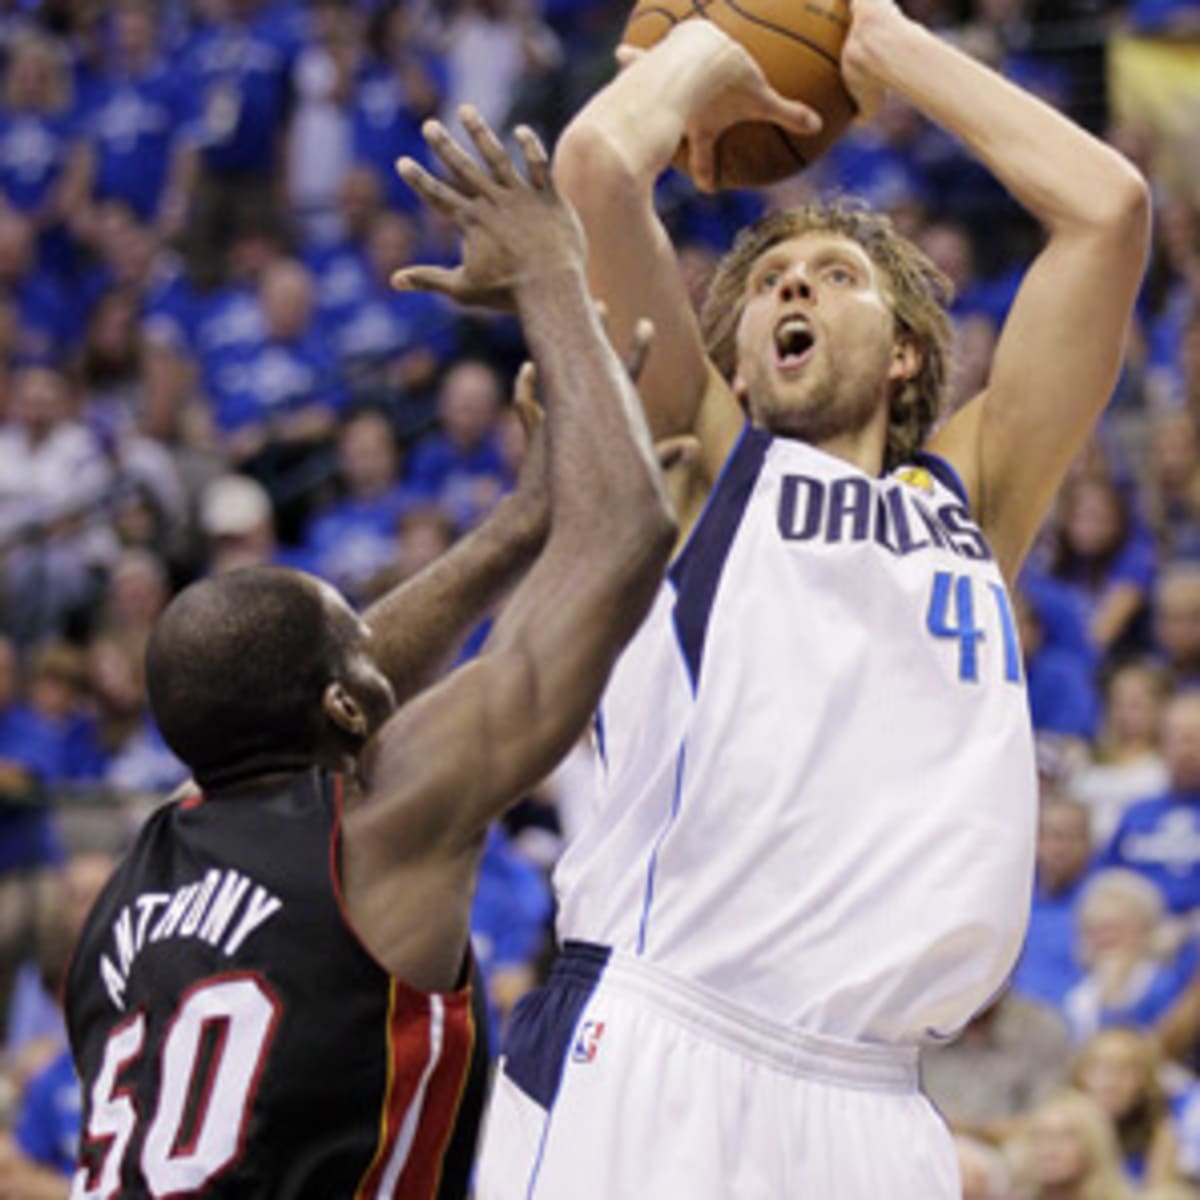 Ian Thomsen: Dirk Nowitzki defied the odds, stayed loyal to